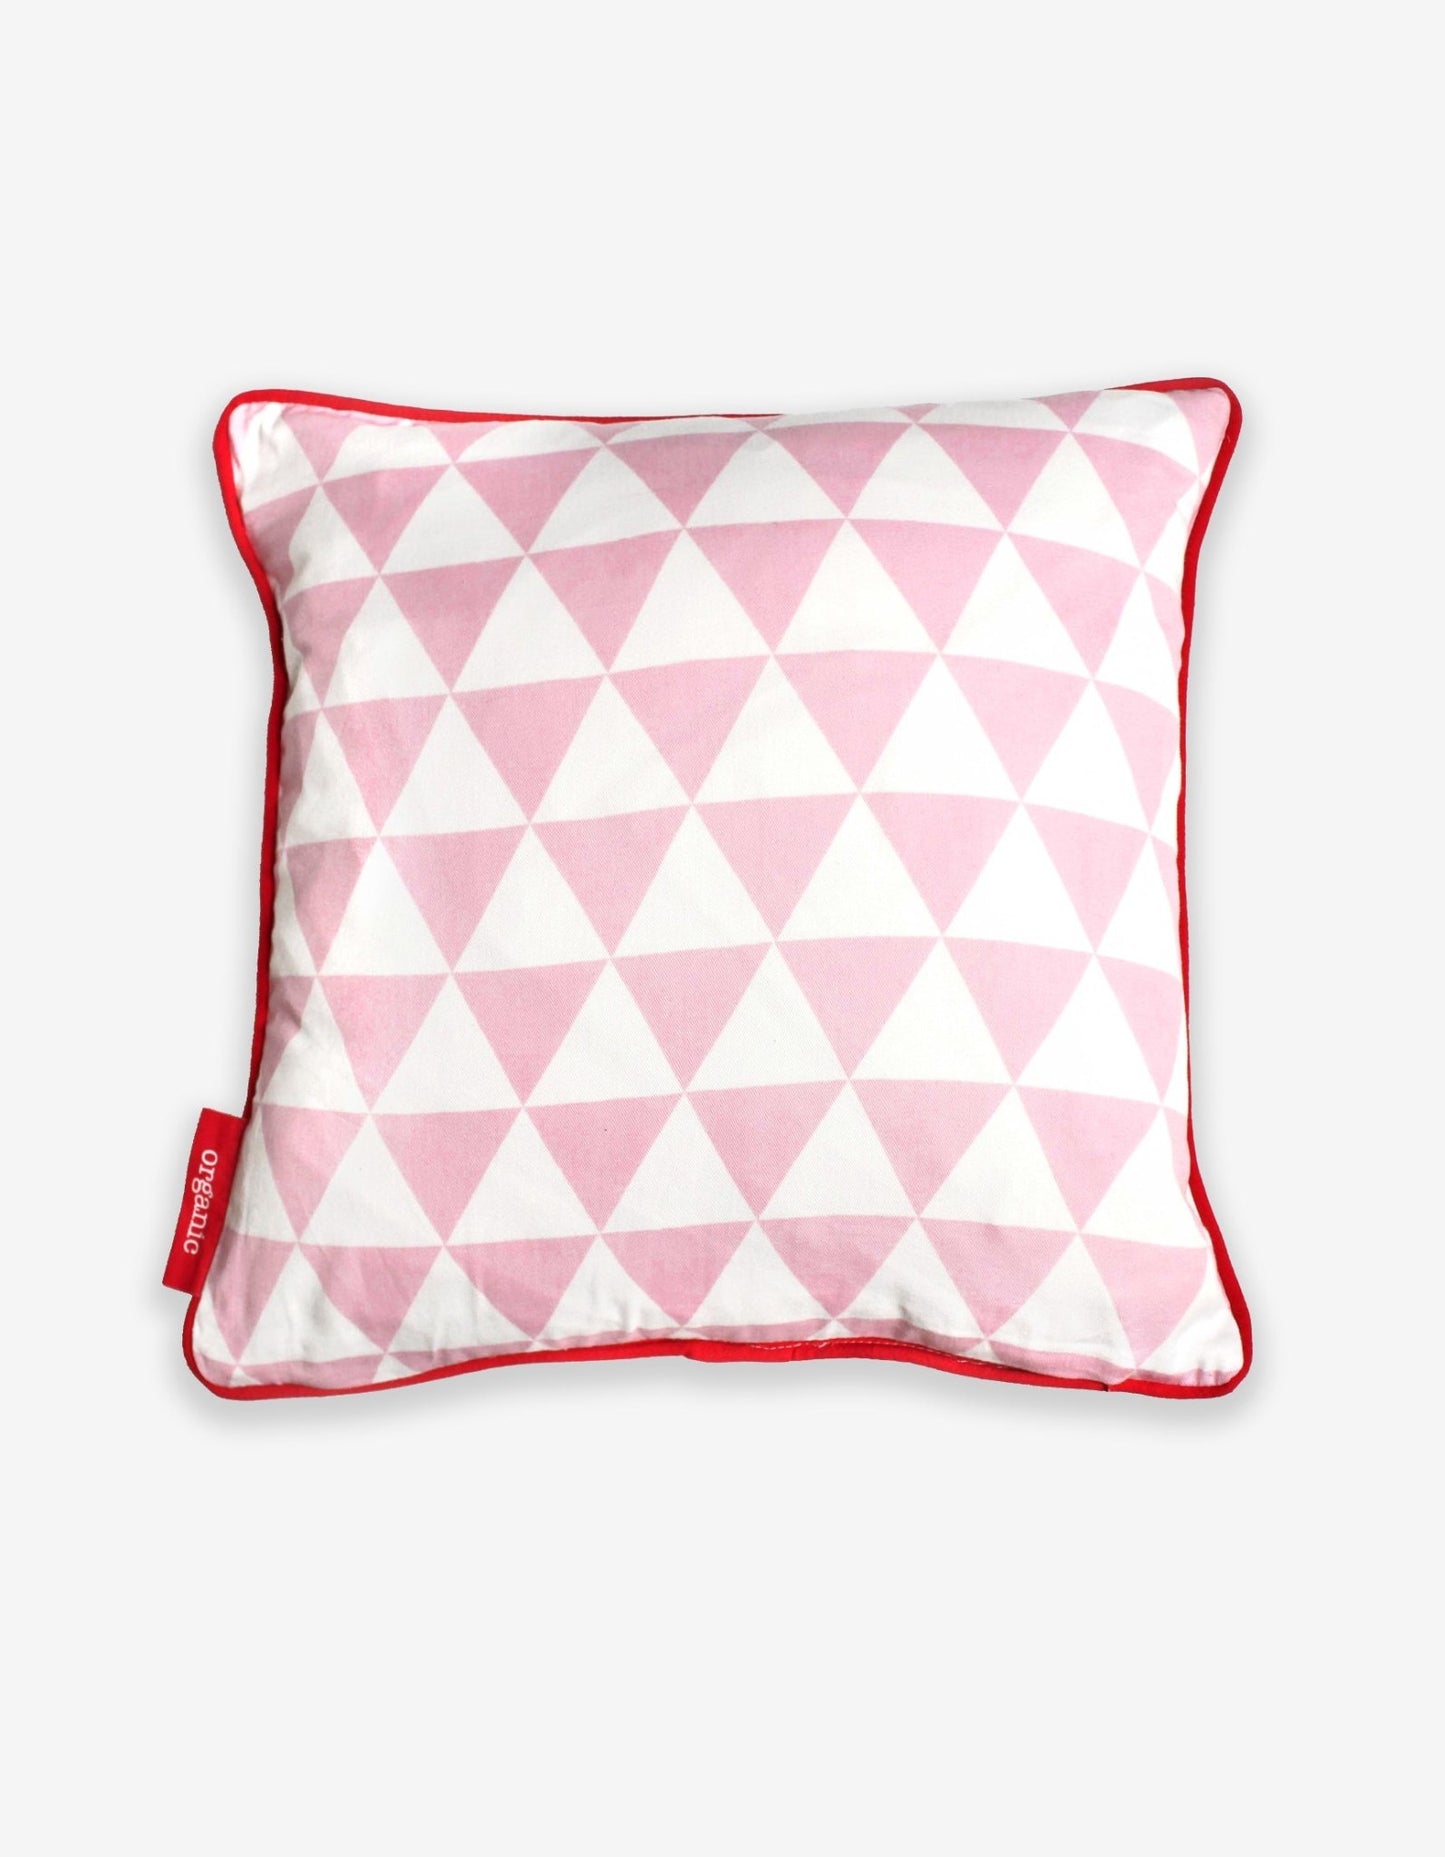 Pink Apple Cushion Cover - Toby Tiger